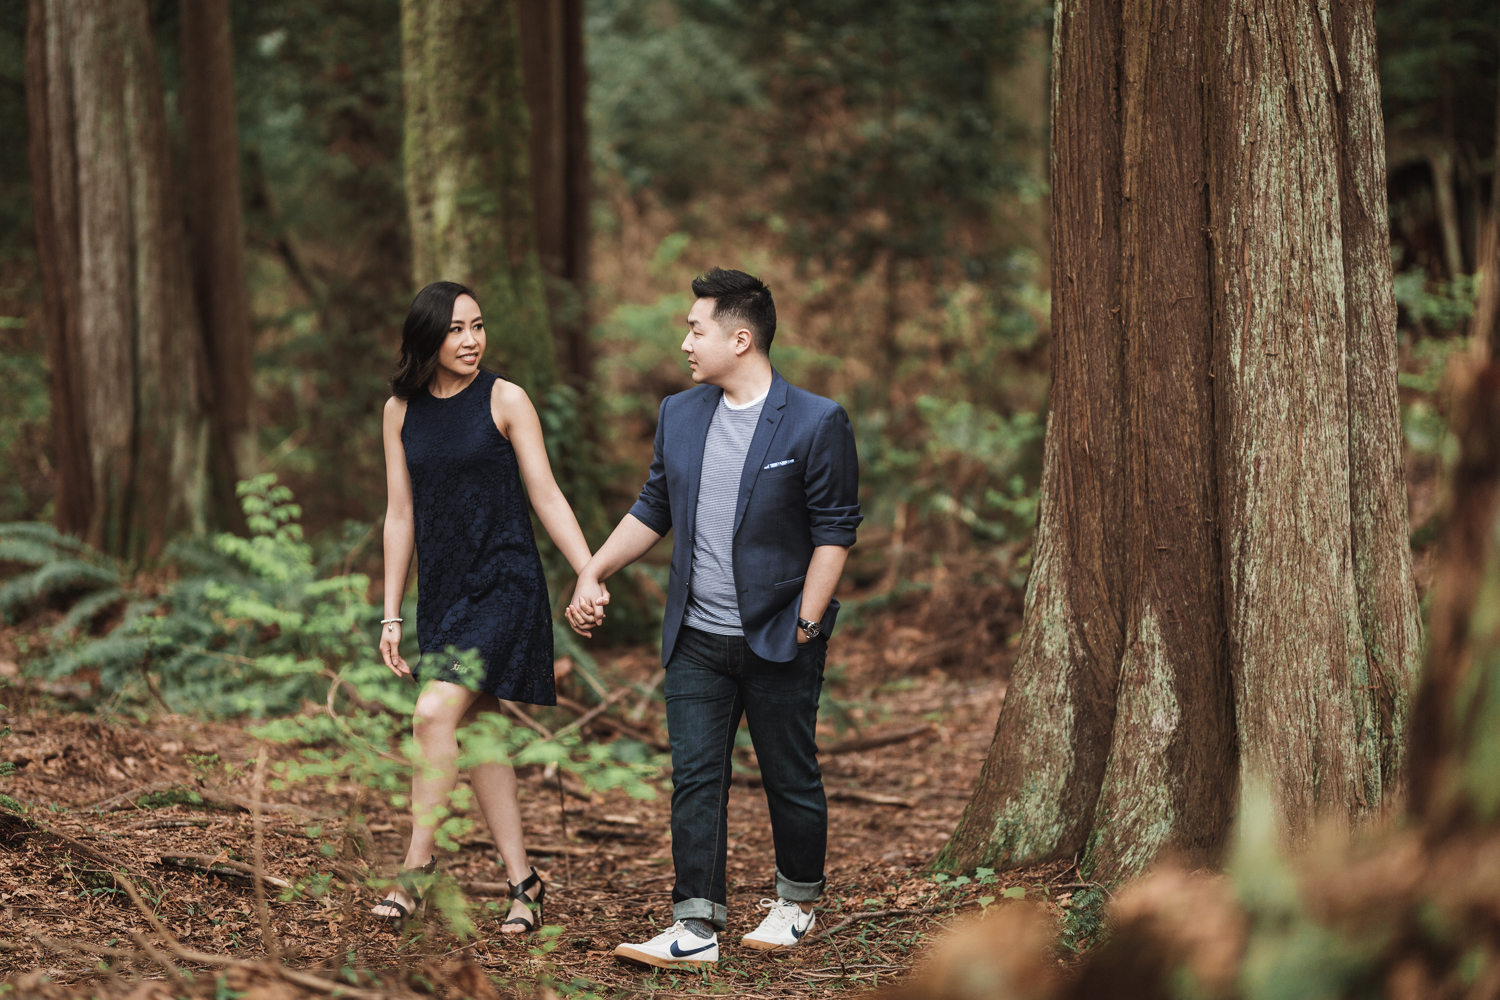 vancouver engagement photographer in stanley park during spring cherry blossom season